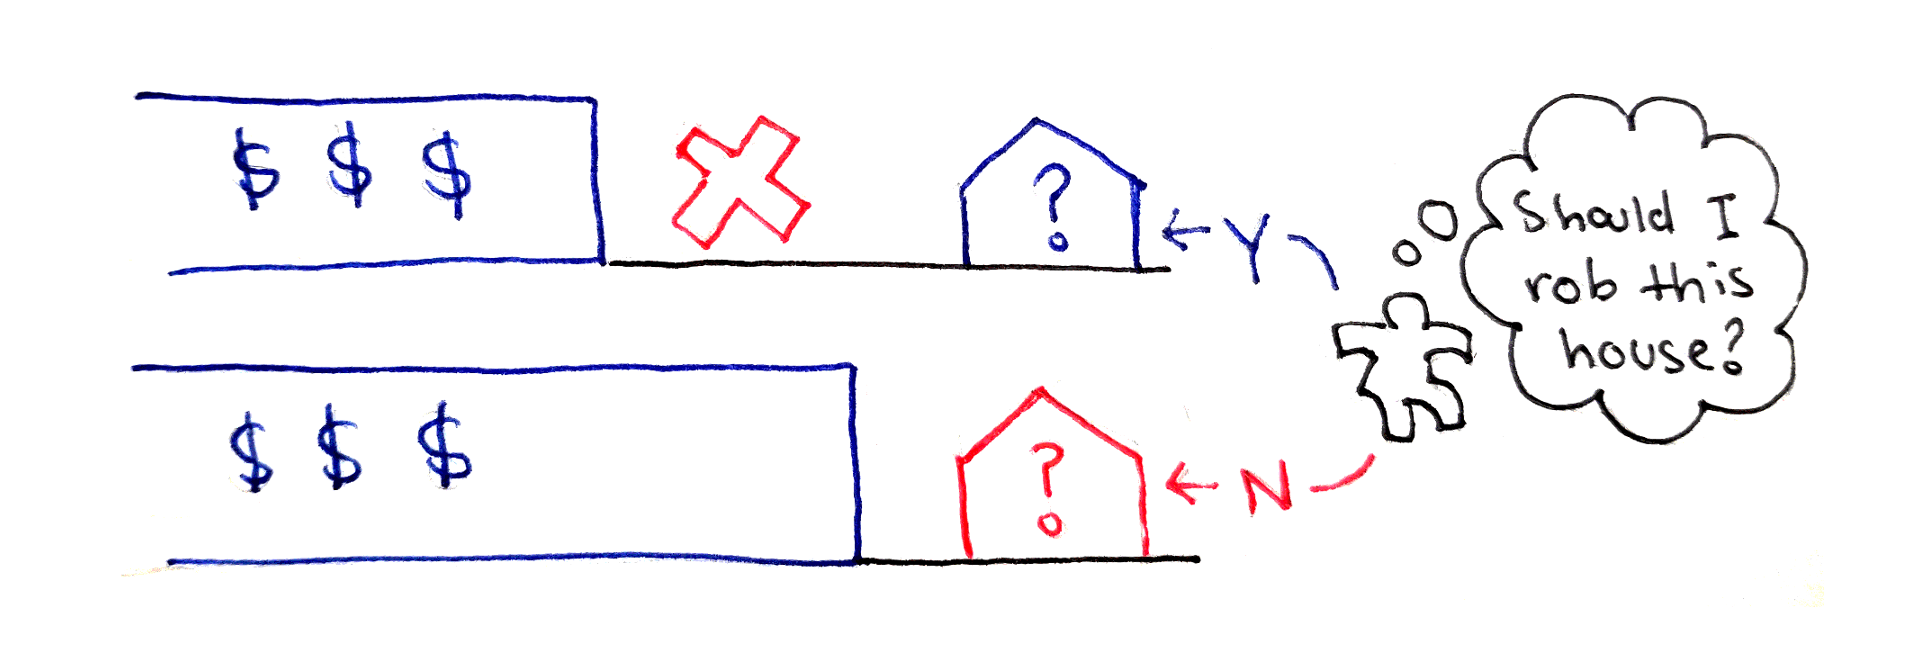 house-robber-decision.png